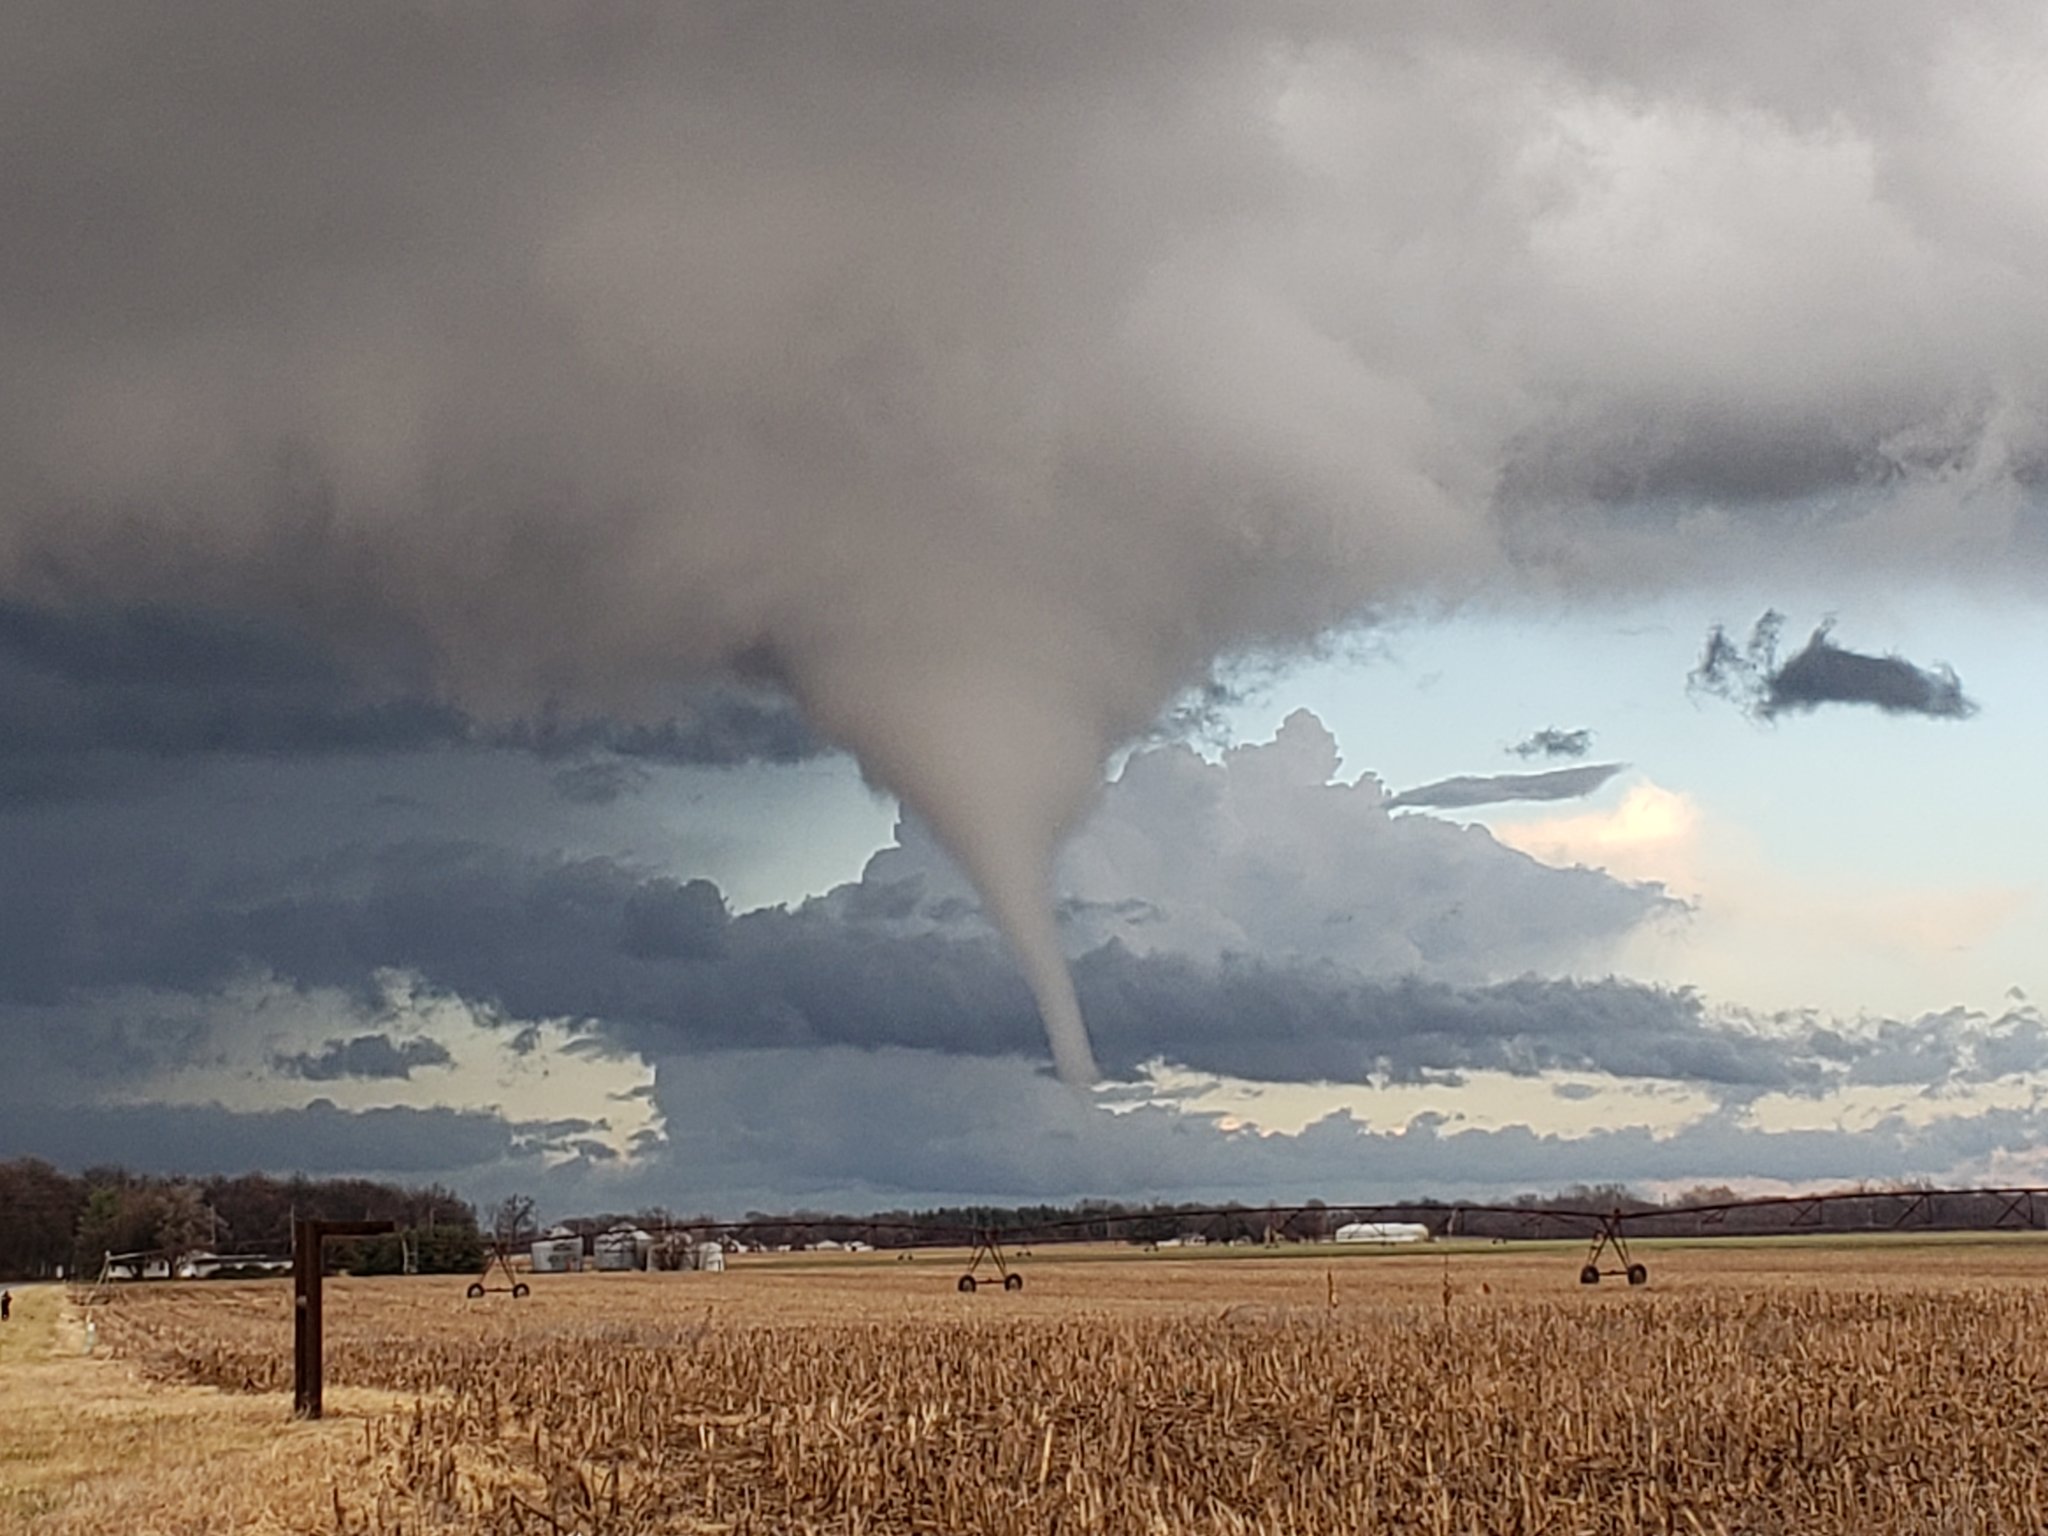 Beardstown tornado at 3:25 pm. Photo by Andrew Pritchard.